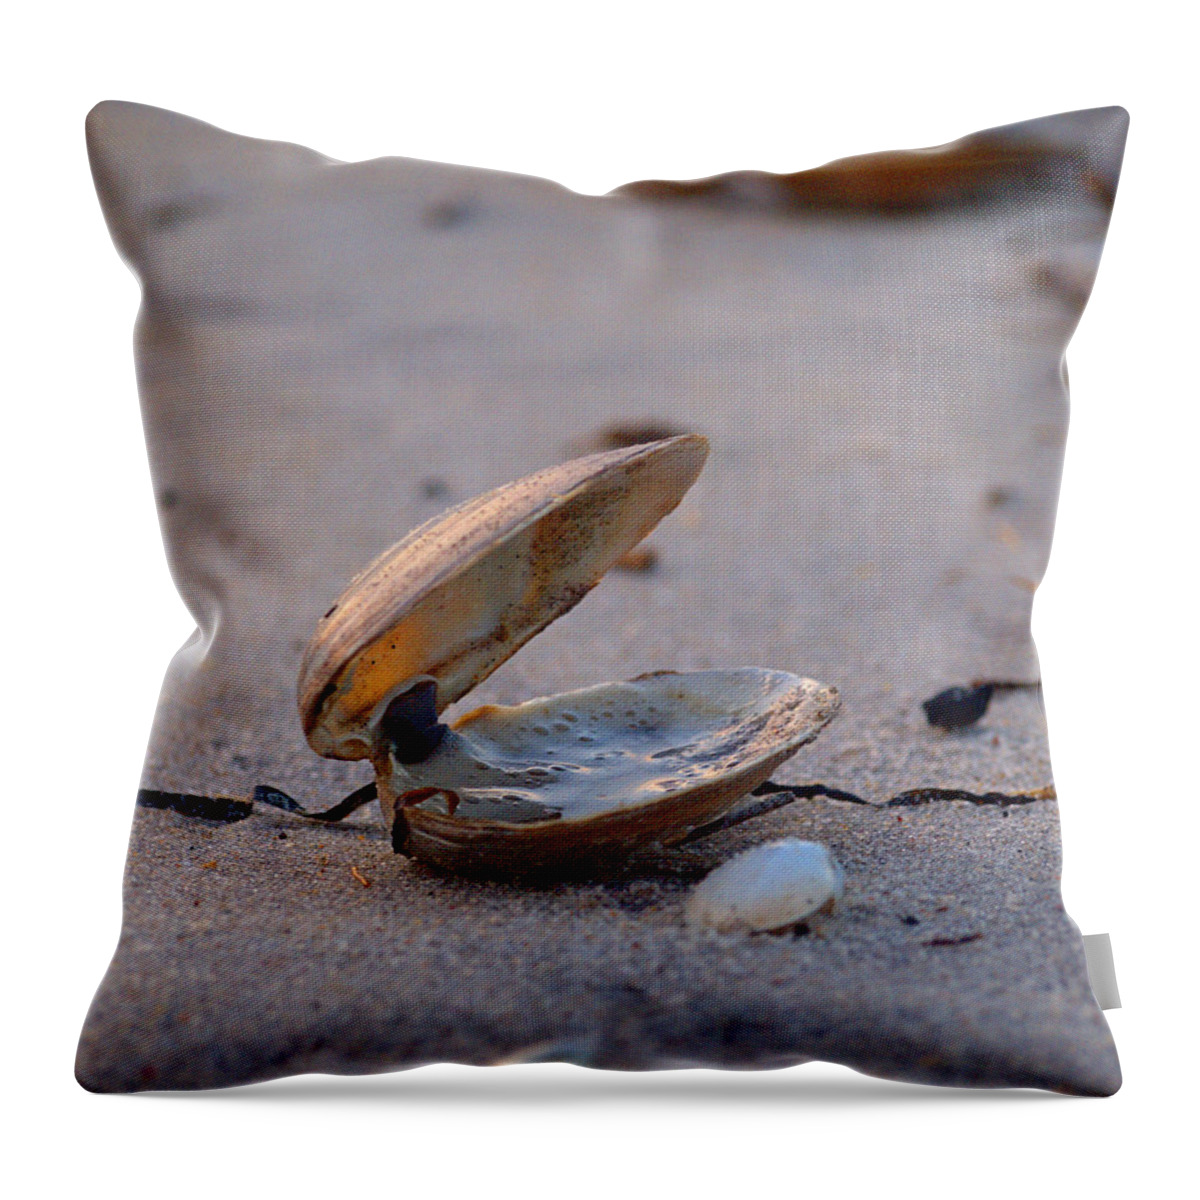 Clam Throw Pillow featuring the photograph Clam I by Newwwman